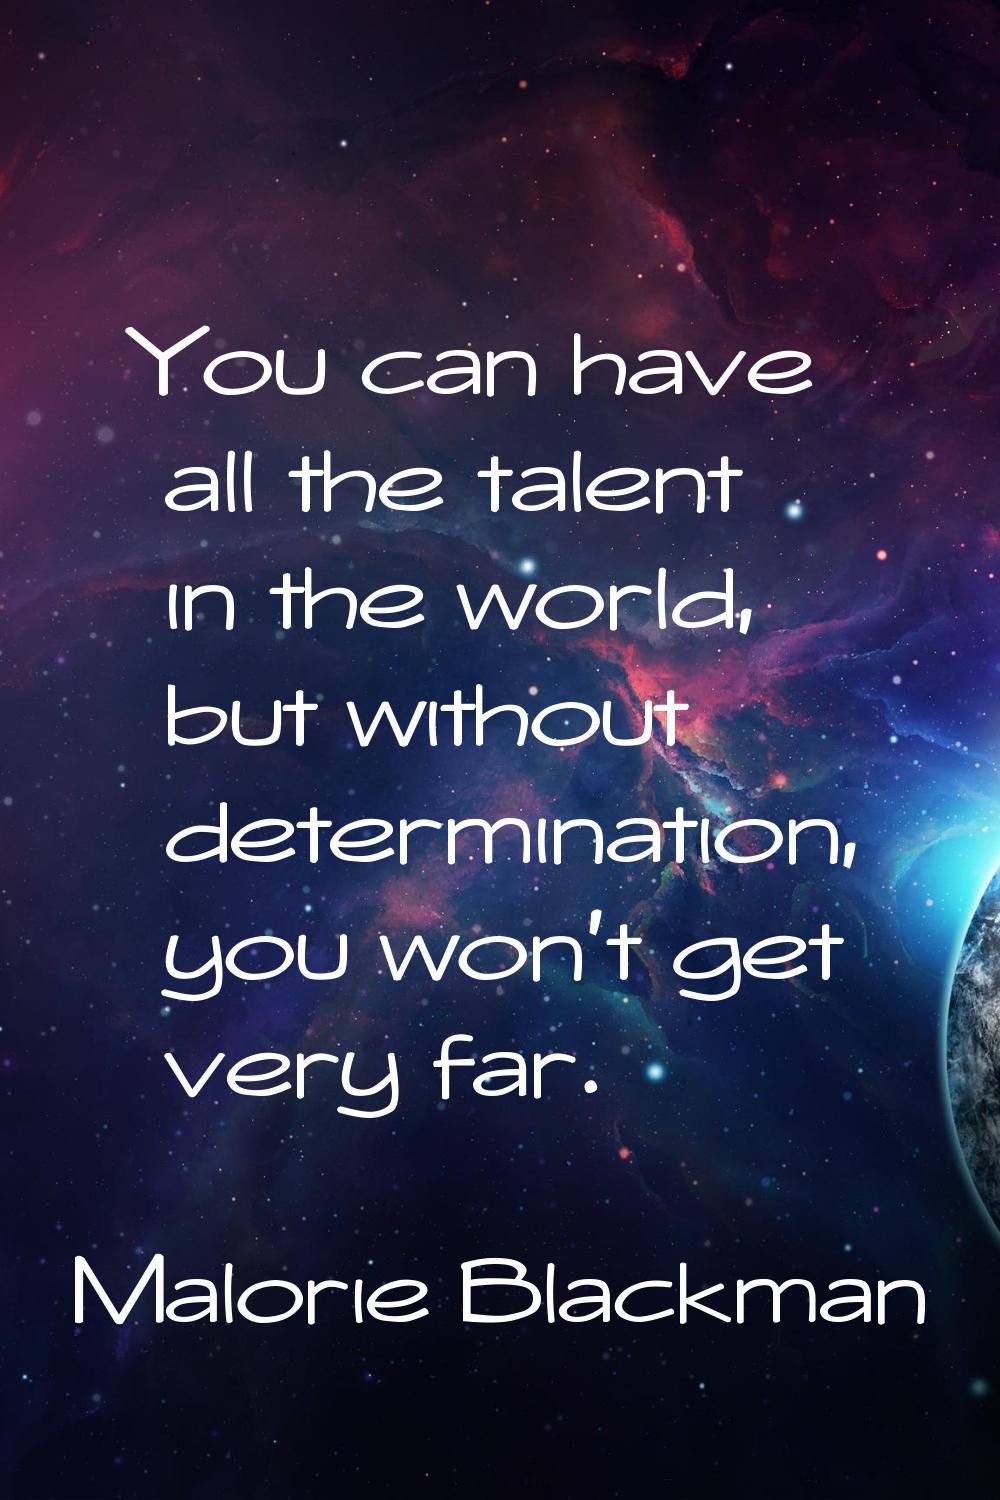 You can have all the talent in the world, but without determination, you won't get very far.